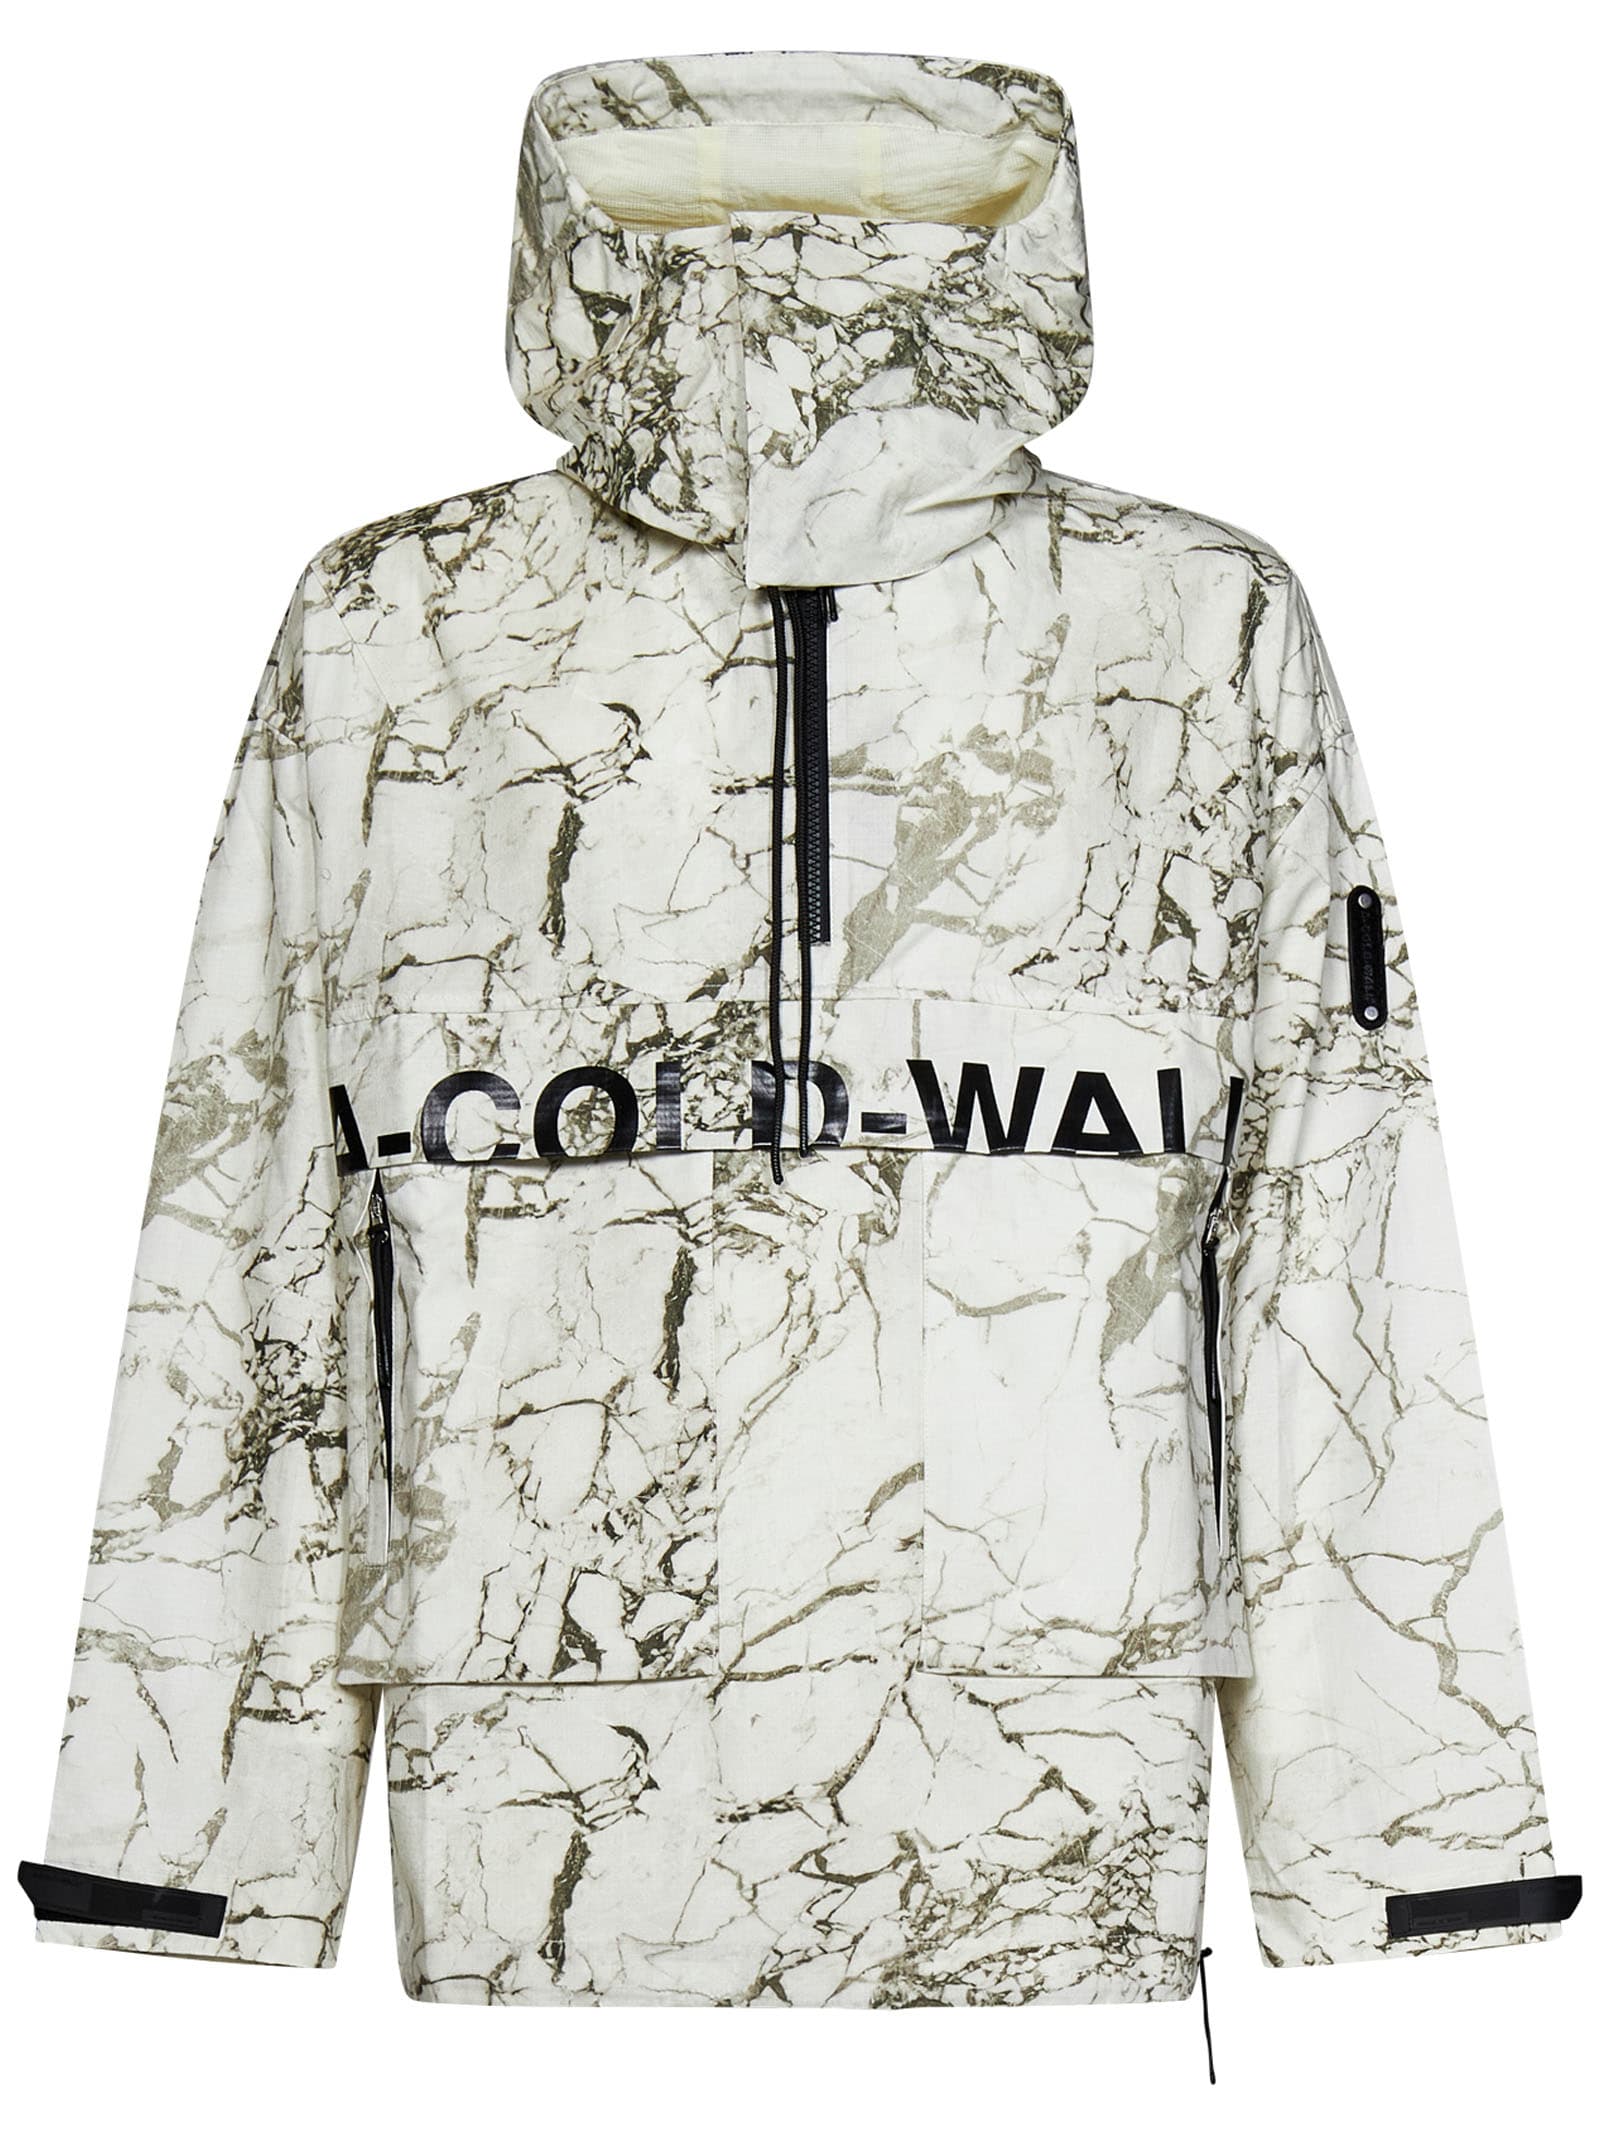 A-COLD-WALL* JACKET